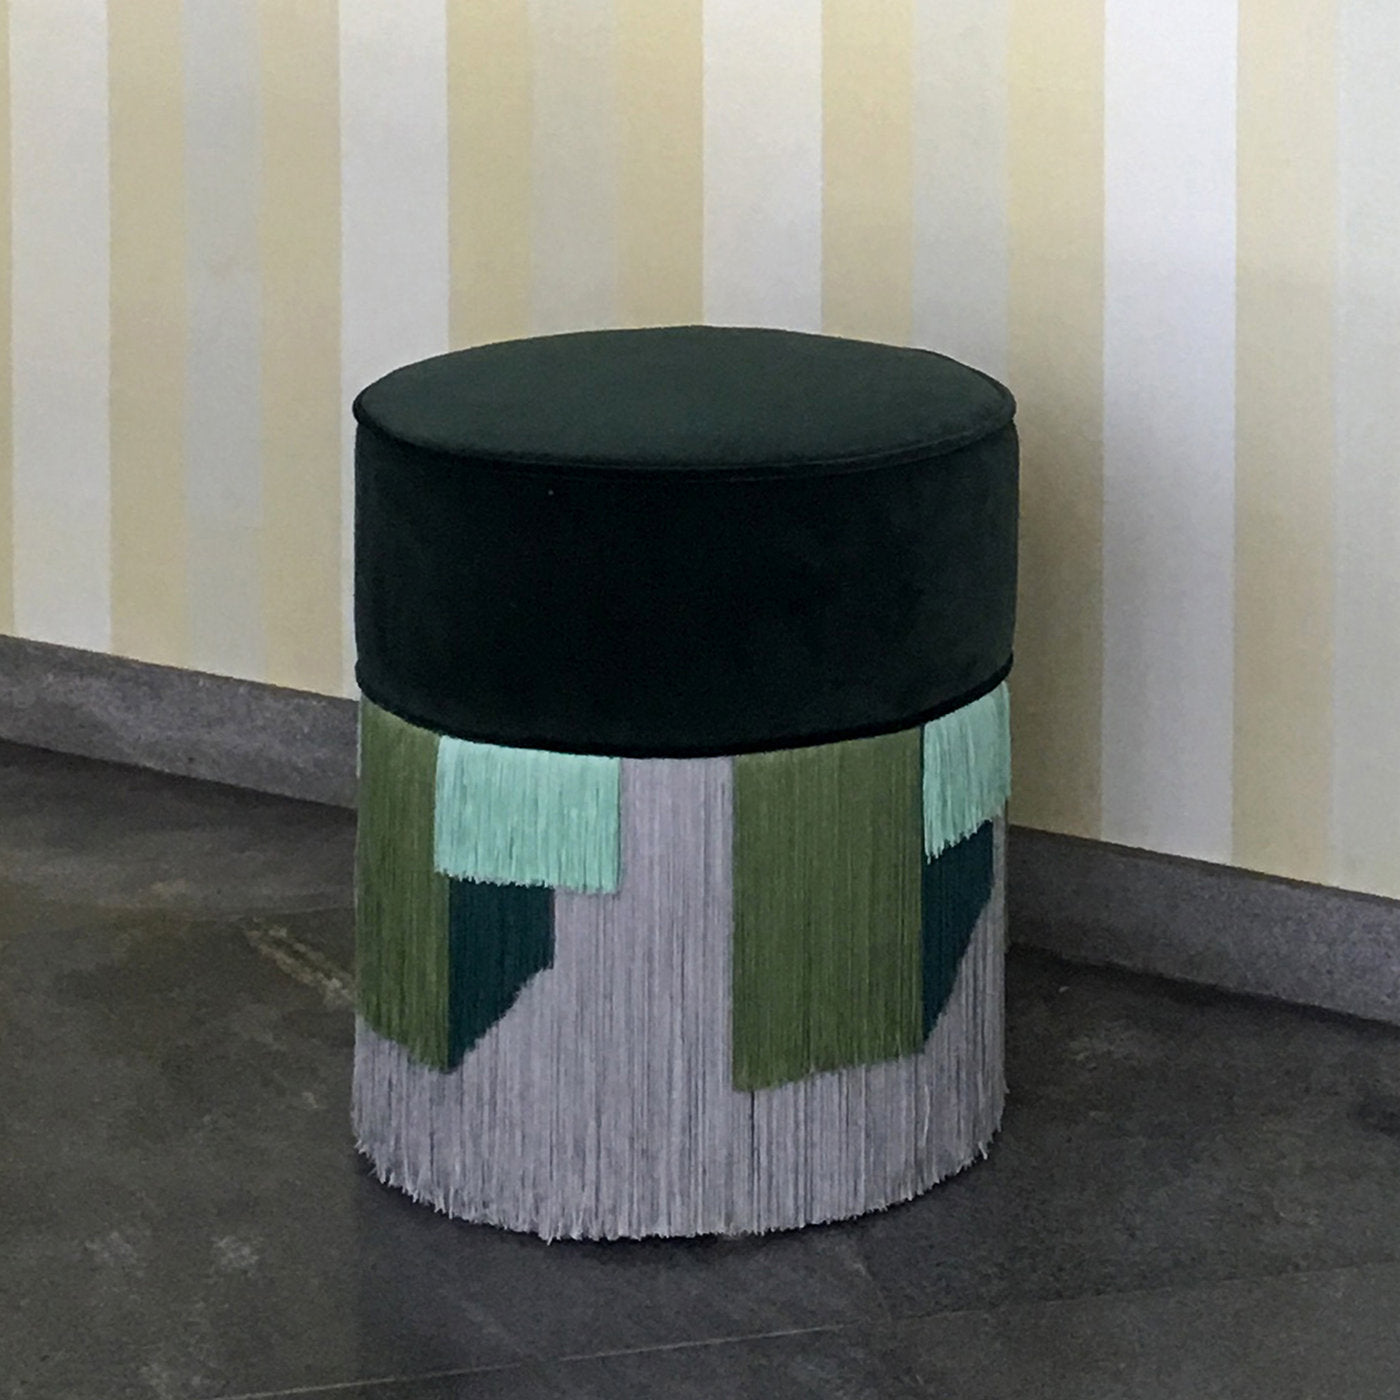 Couture Dark Green Pouf with Geometric Fringe - Alternative view 1